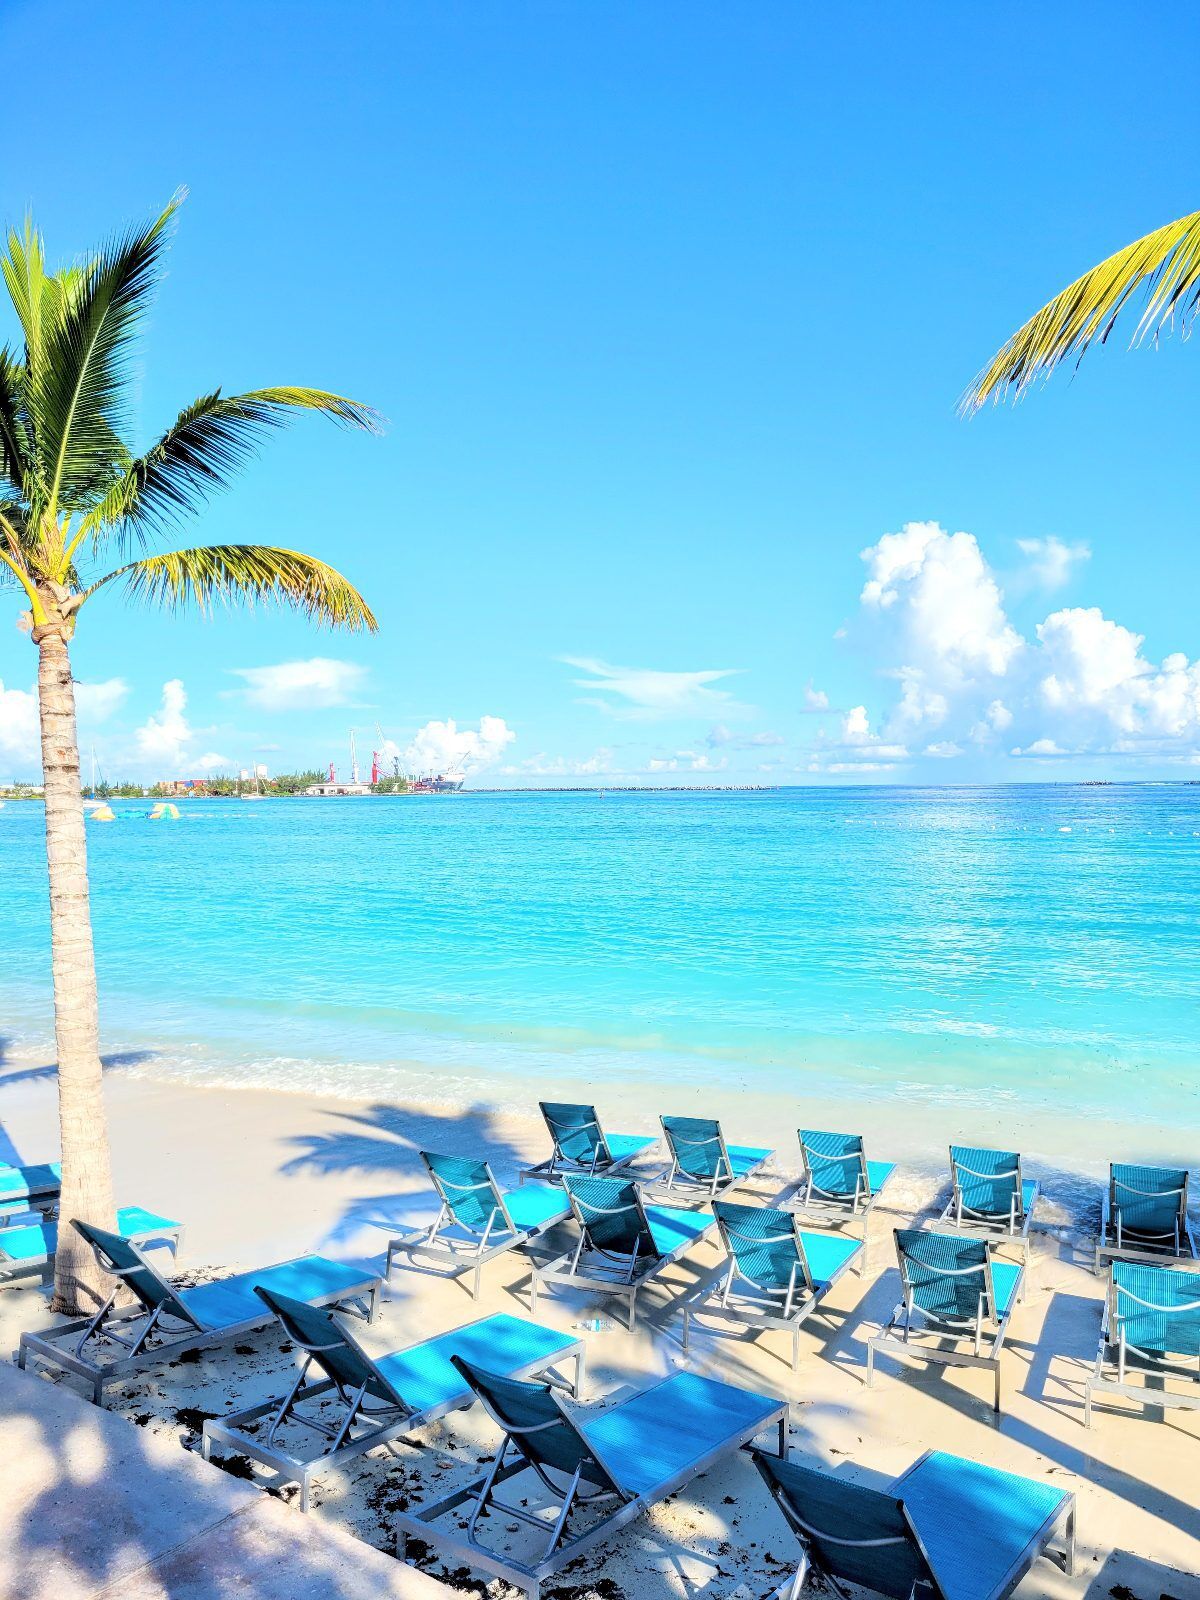 Wondering if purchasing a Margaritaville Bahamas day pass is worth the money? With a typical $100 per person price tag, you may be pondering that question. Today's travel blog post